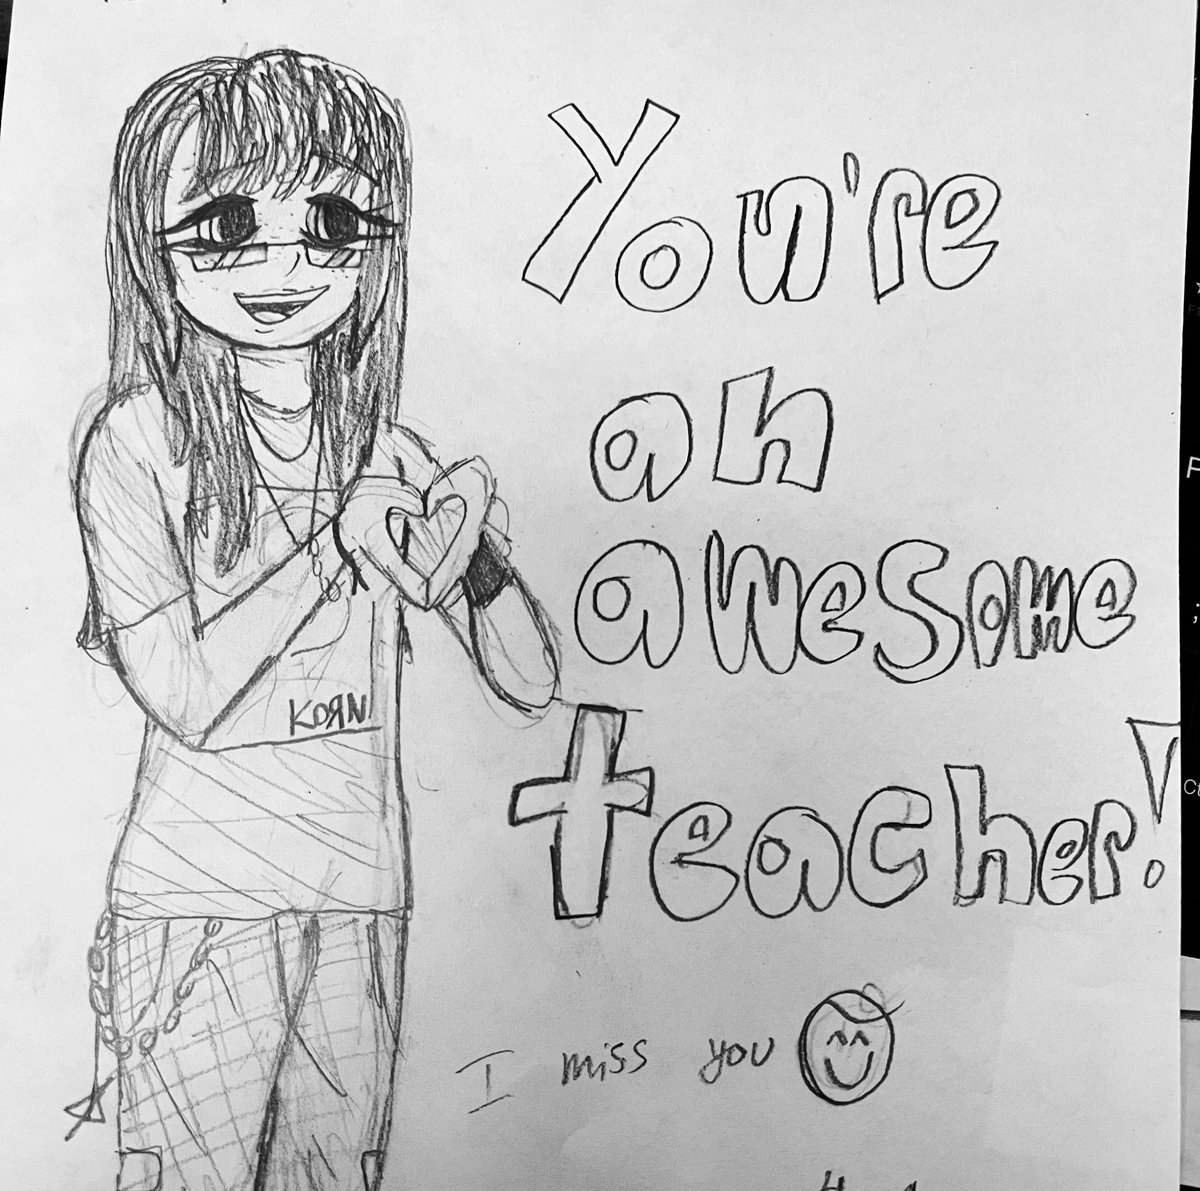 What a sweet way to begin #TeacherAppreciationWeek
Even high schooler’s drawings can pull at your heartstrings. These little reminders are everything. @ButlerTech 🥰 #WhyITeach 💙